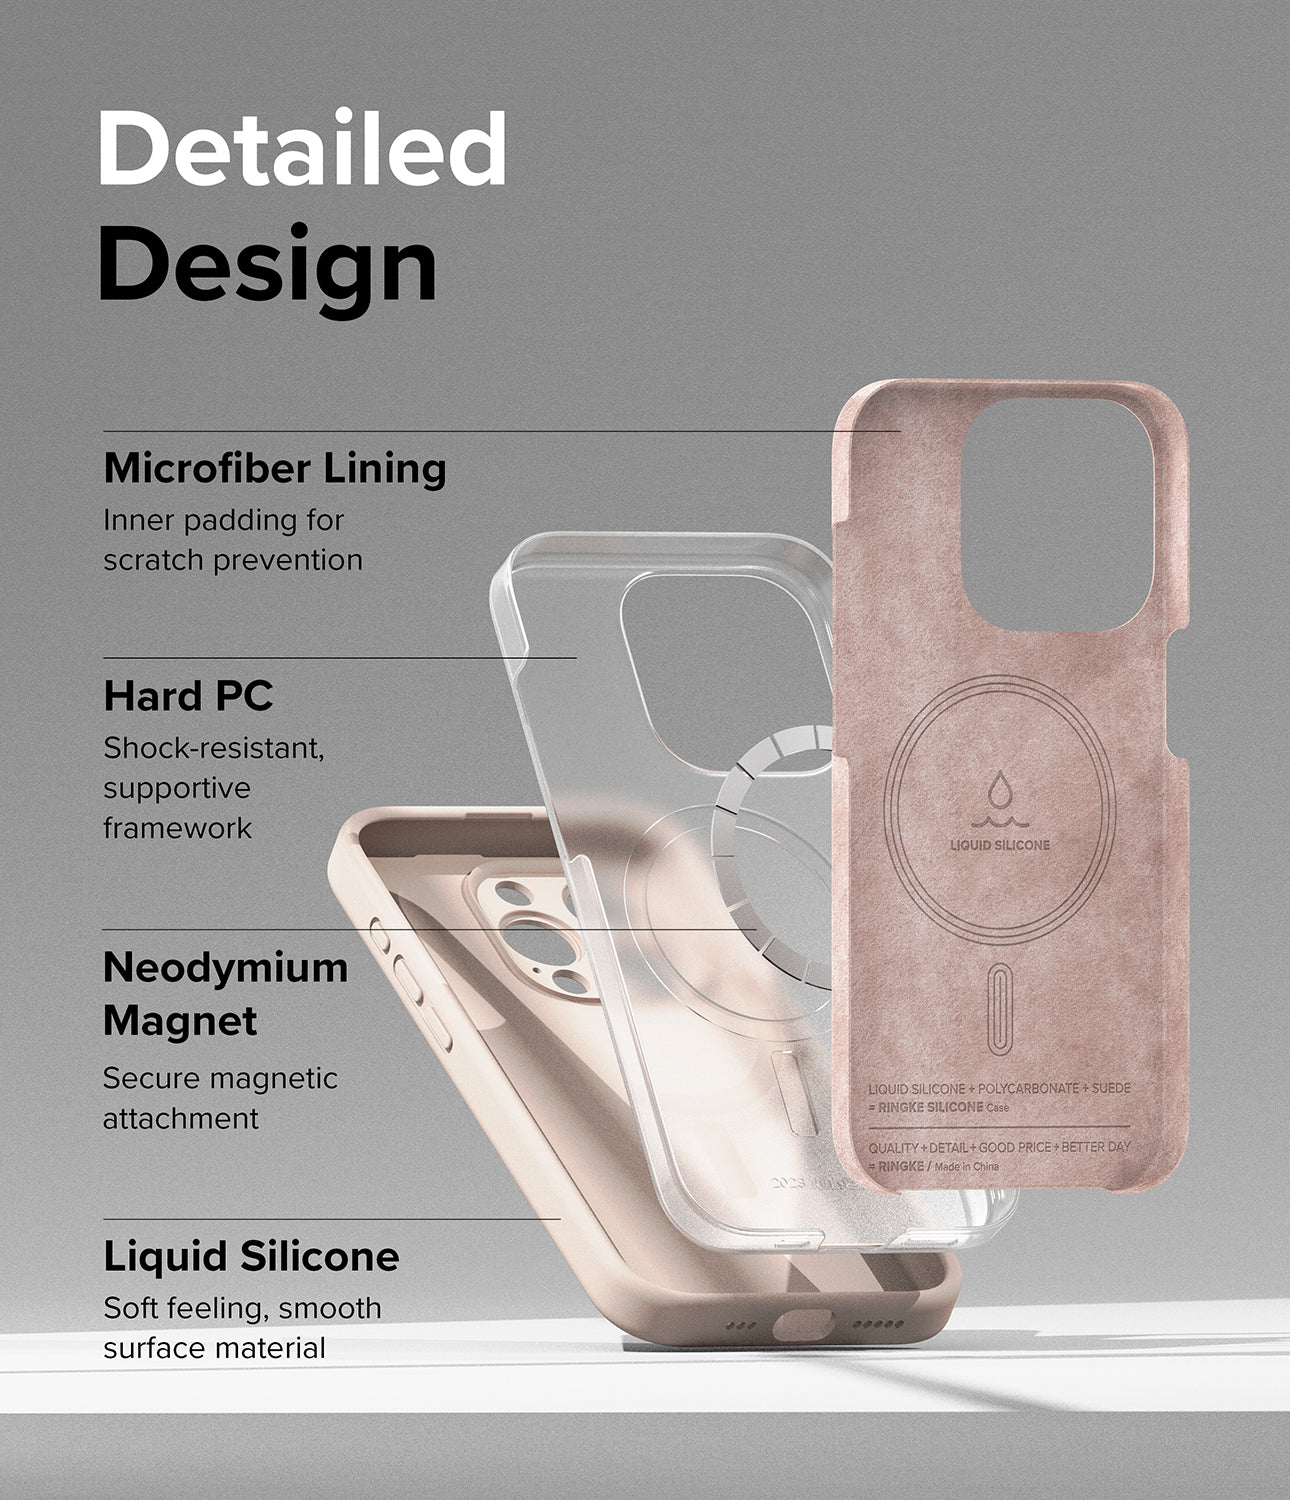 iPhone 15 Pro Max Case | Silicone Magnetic - Pink Sand - Detailed Design. Inner padding for scratch prevention with Microfiber Lining. Shock-resistant, supportive framework with Hard PC. Neodymium Magnet to secure magnetic attachment. Soft feeling, smooth surface material with Liquid Silicone.